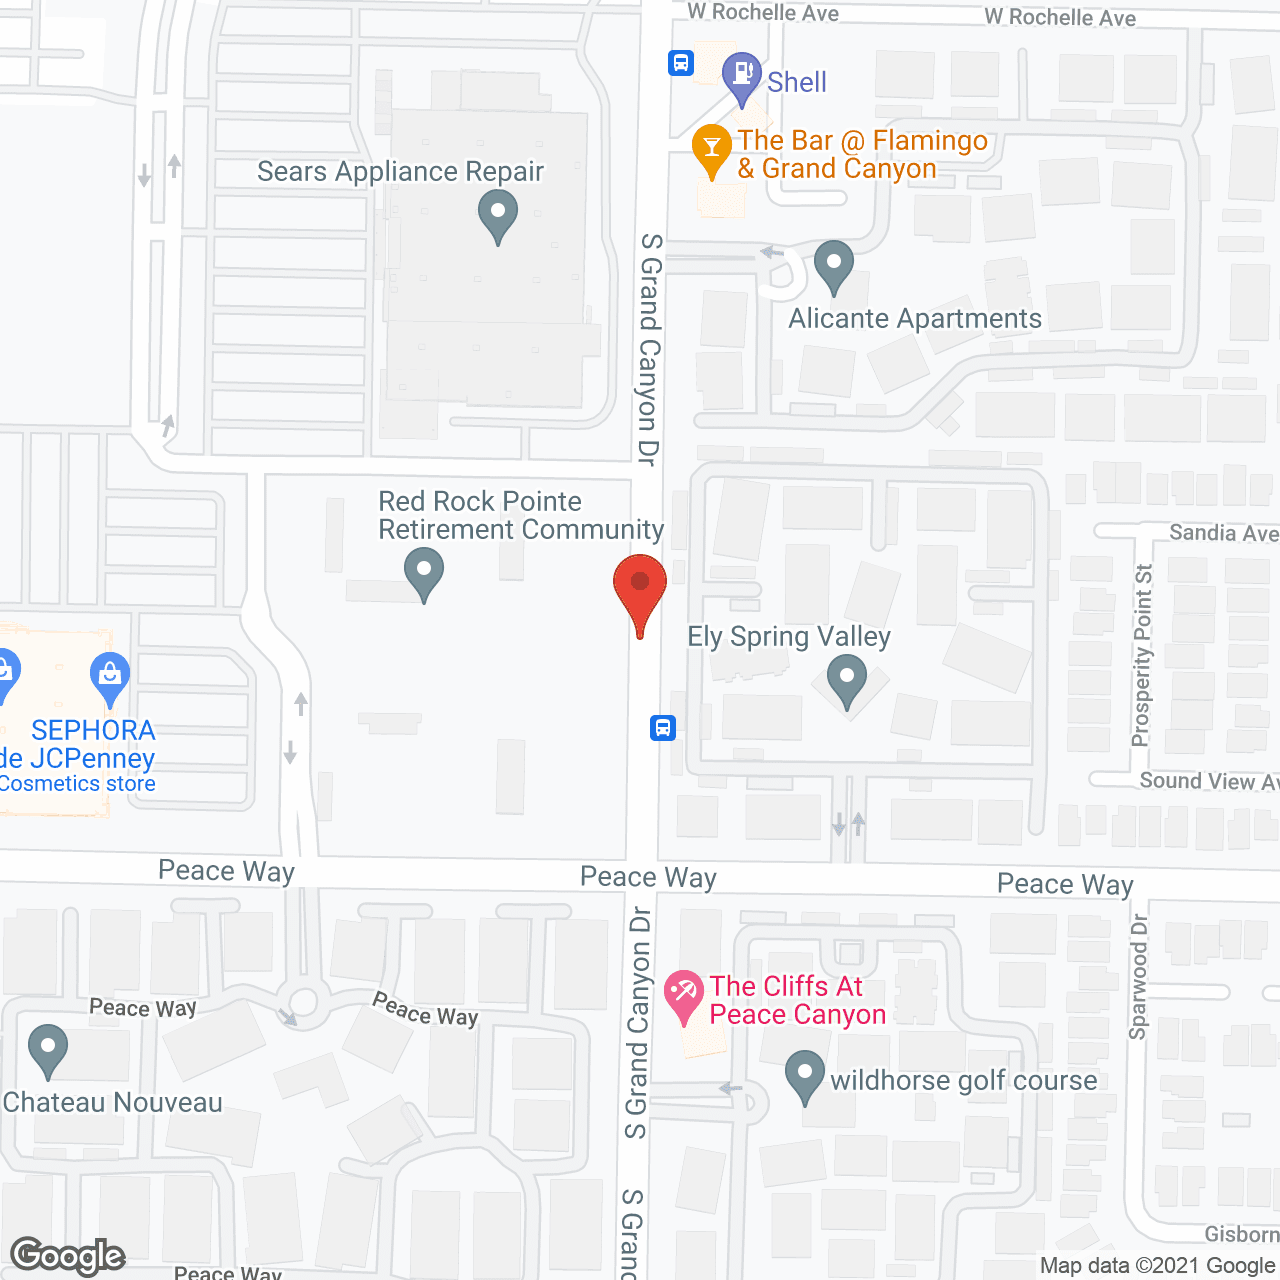 Red Rock Pointe Retirement Community in google map